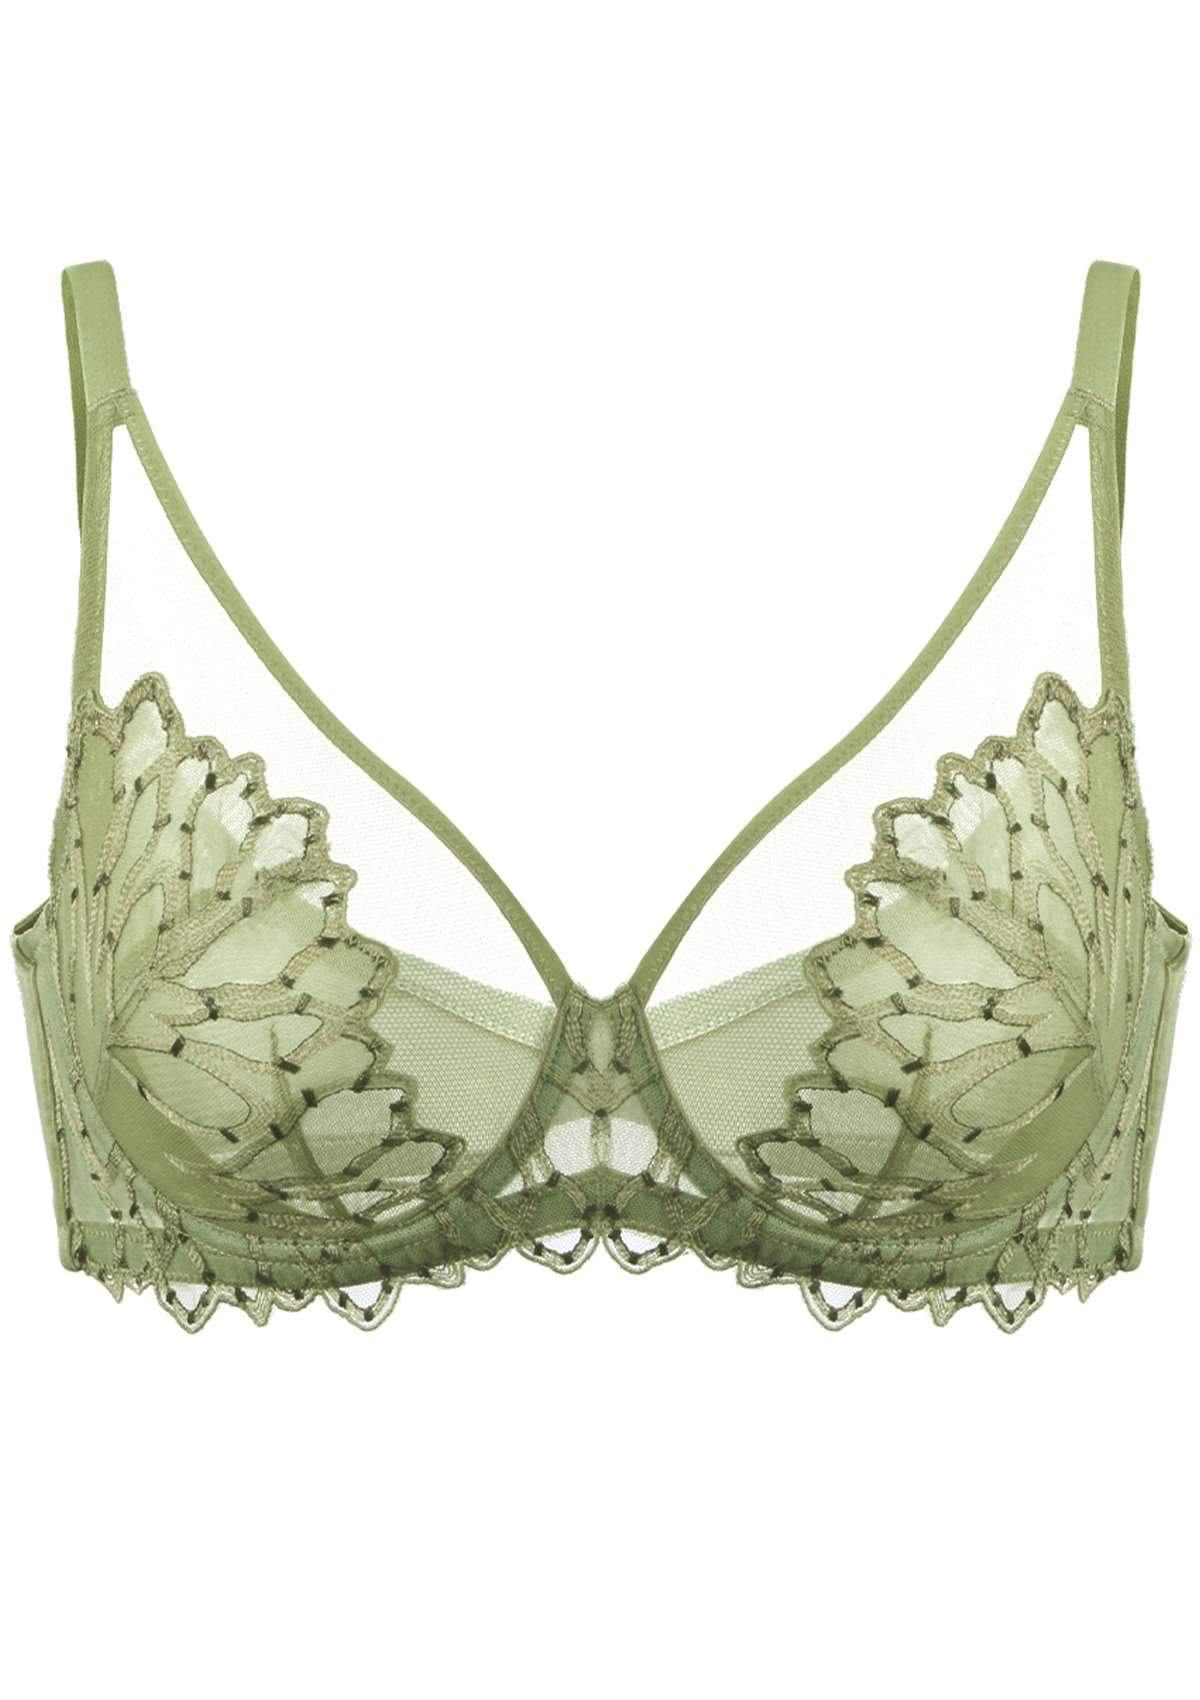 HSIA Chrysanthemum Floral Embroidered Bra: Lace Sheer Unpadded Bra - Black / 32 / D